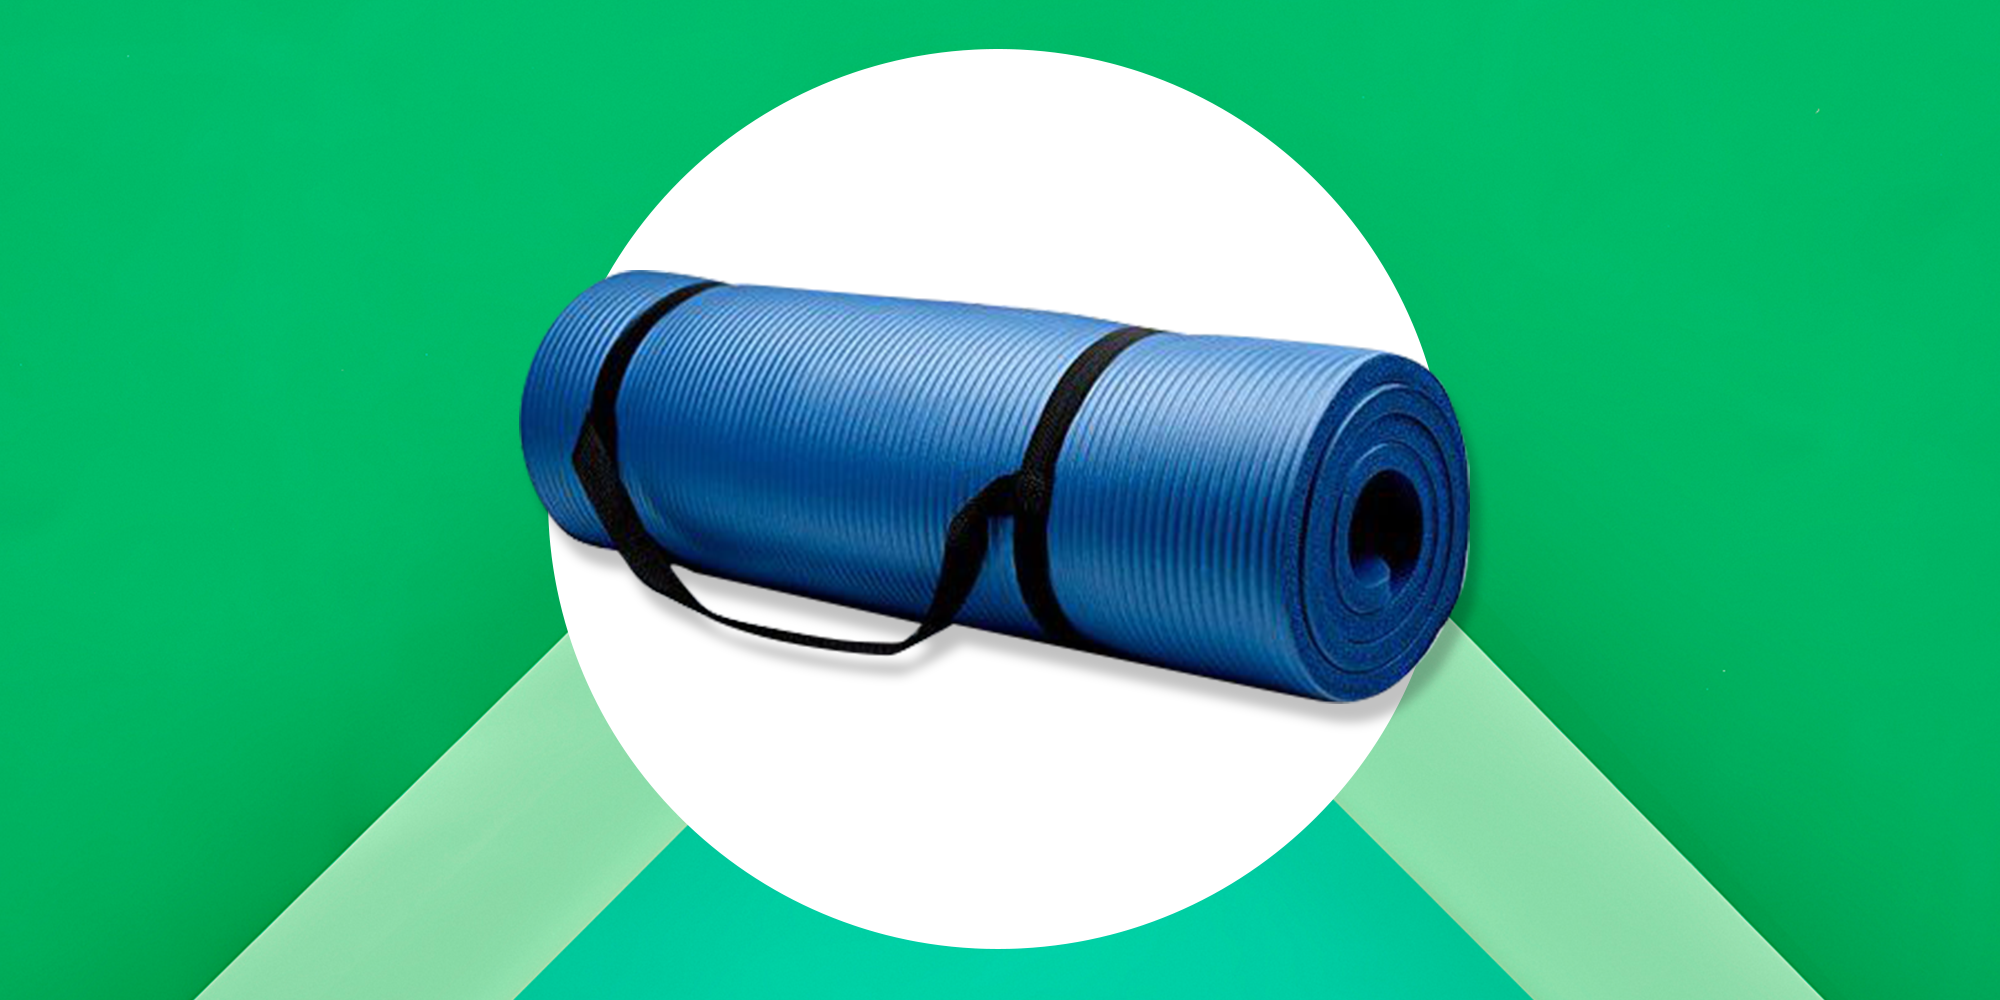 thick and long yoga mat